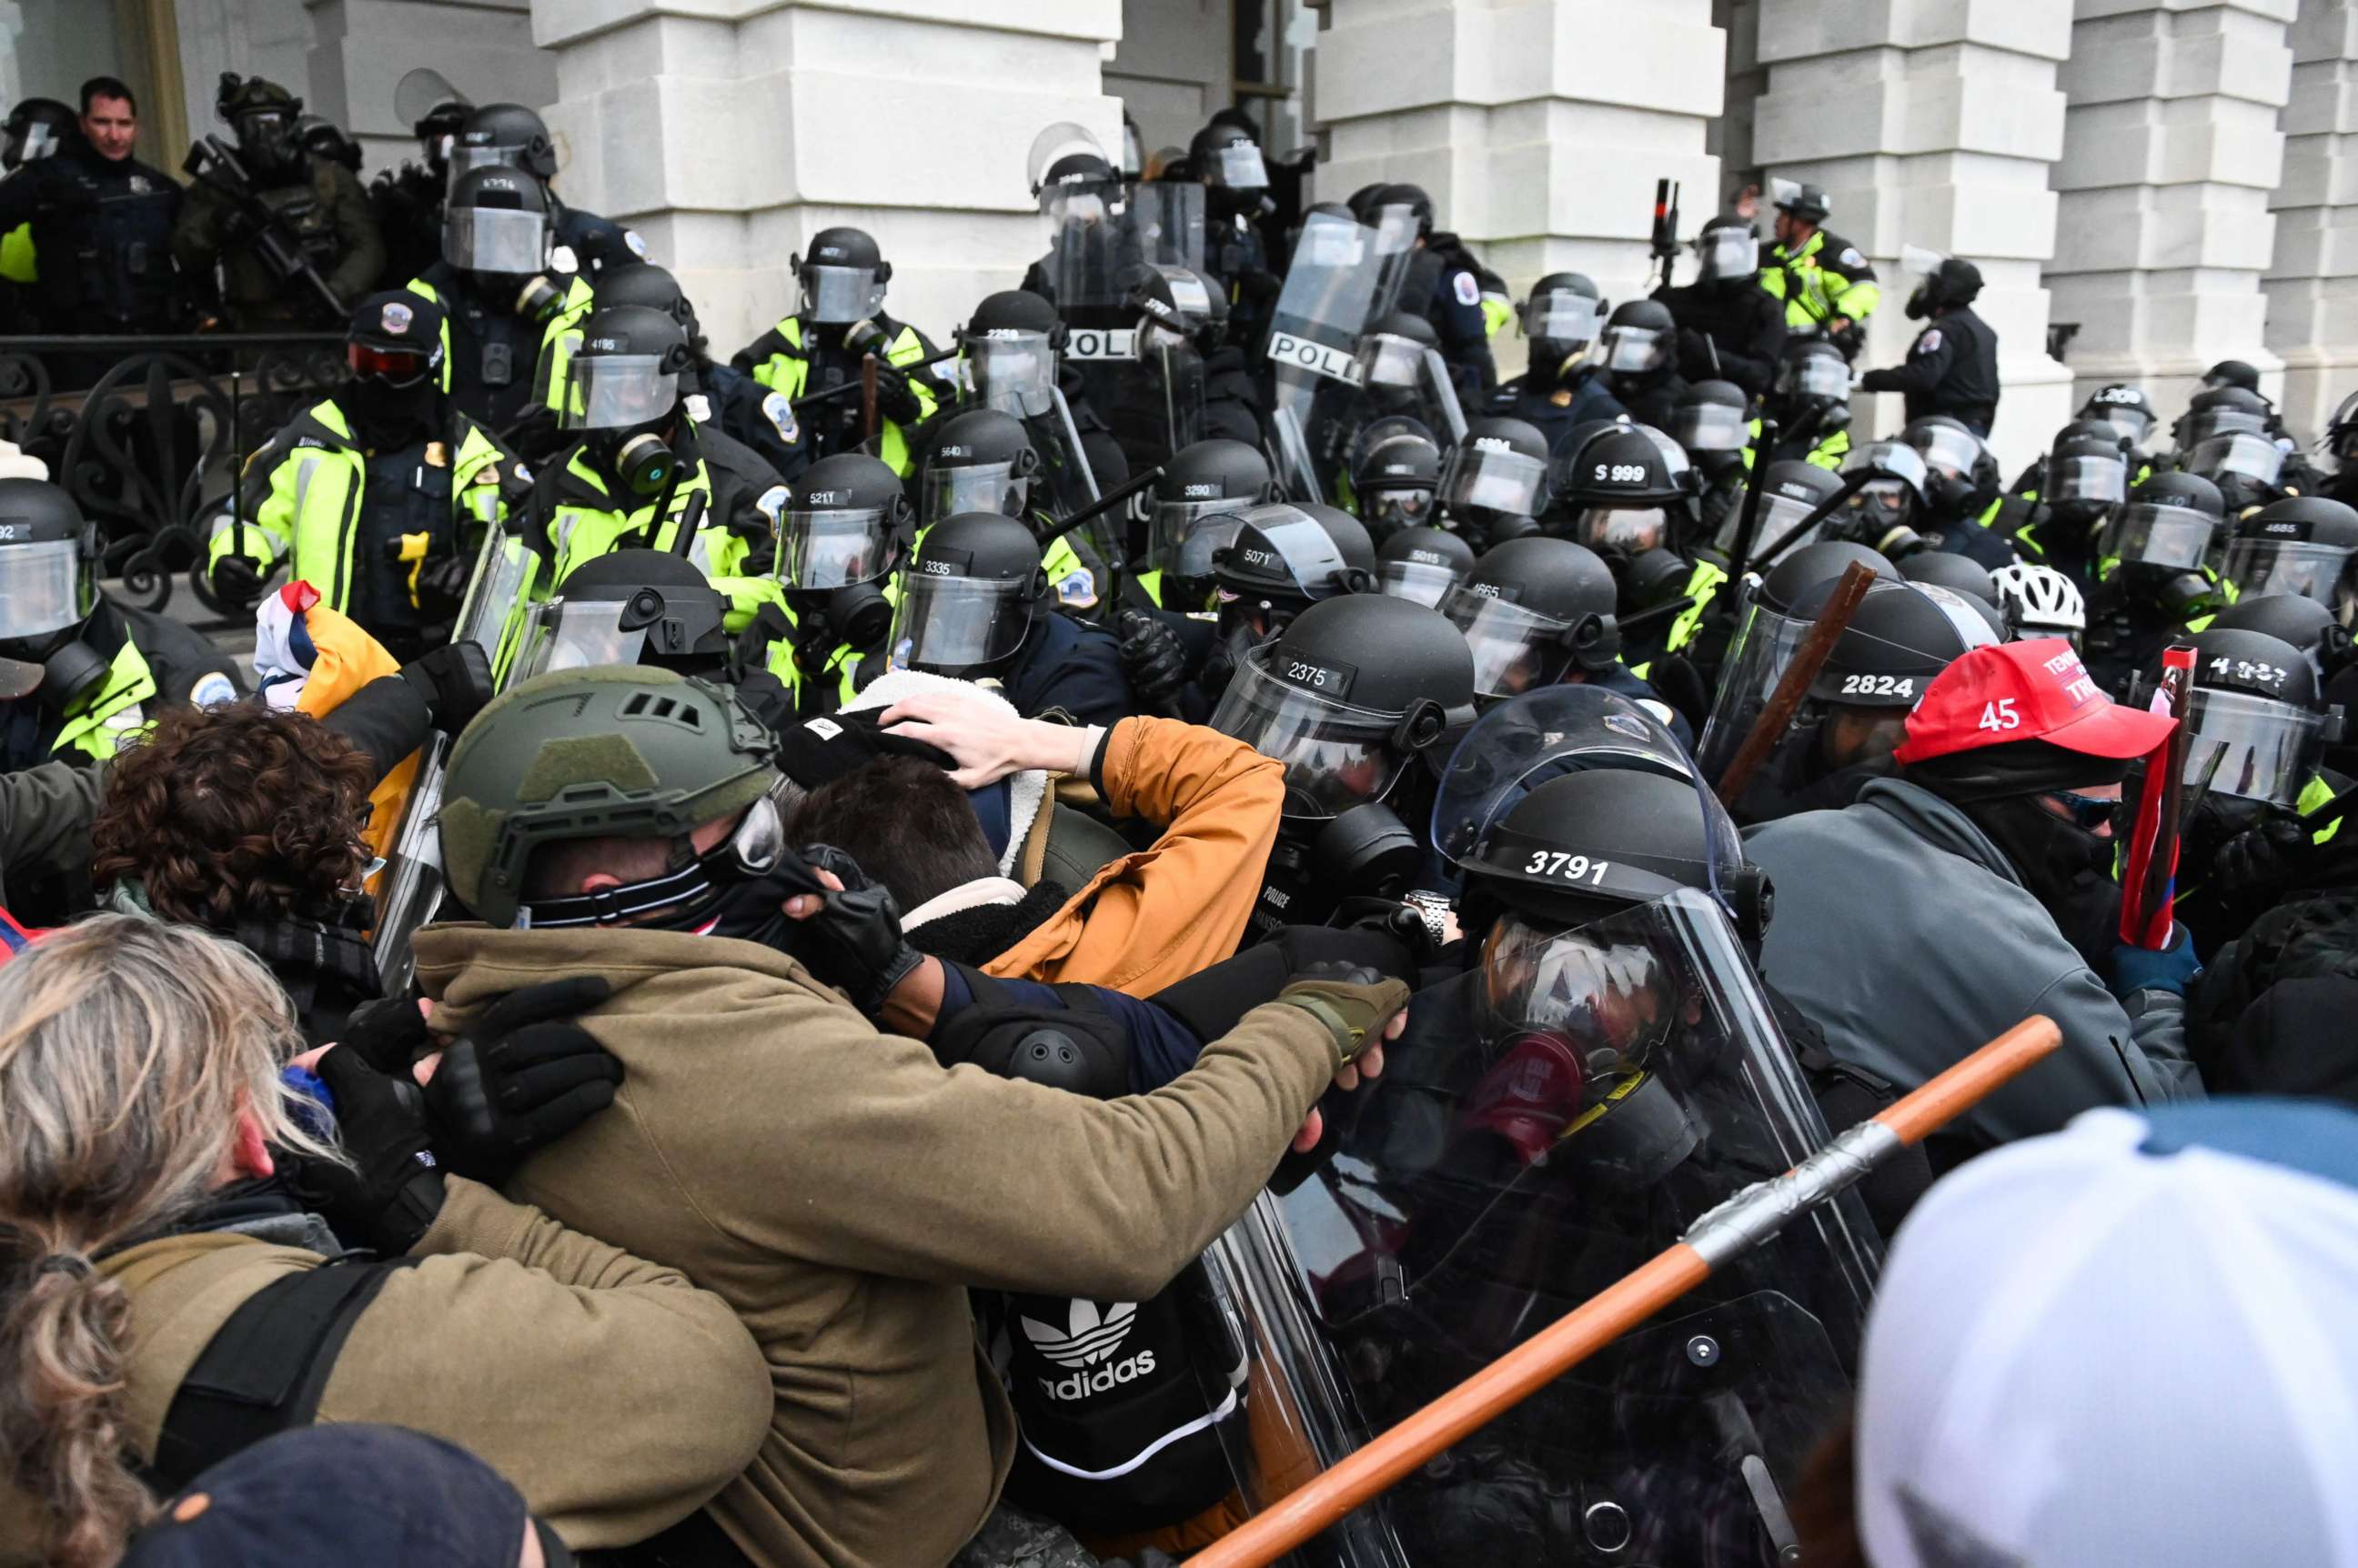 PHOTO: Riot police push back a crowd of supporters of US President Donald Trump after they stormed the Capitol building in Washington, D.C., Jan. 6, 2021.